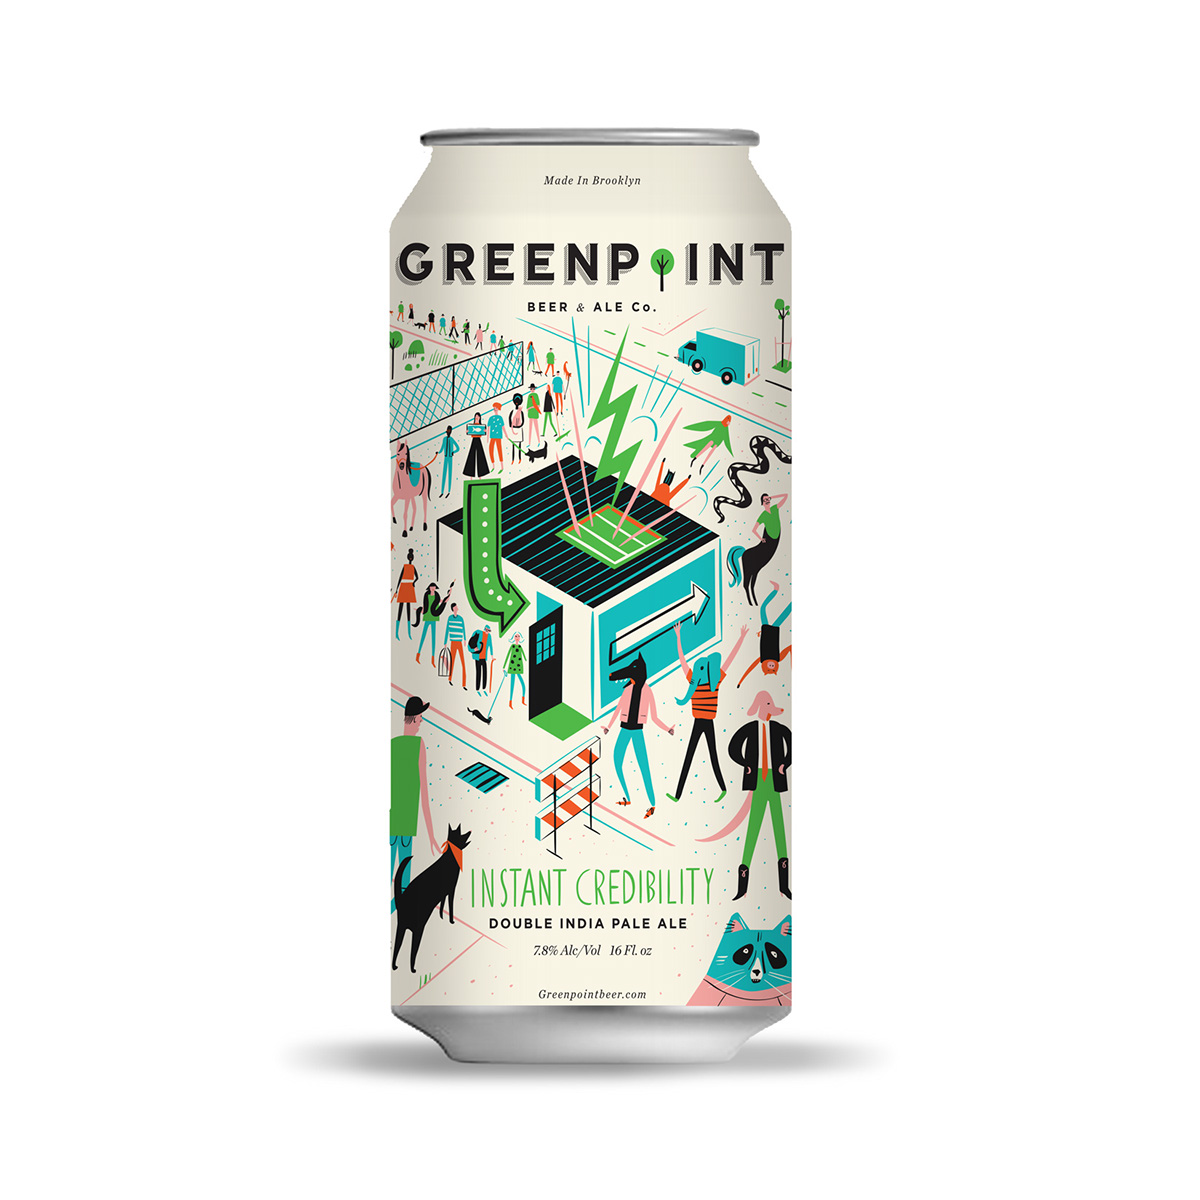 beer brewery craftbeer Packaging party animals greenpoint Brooklyn